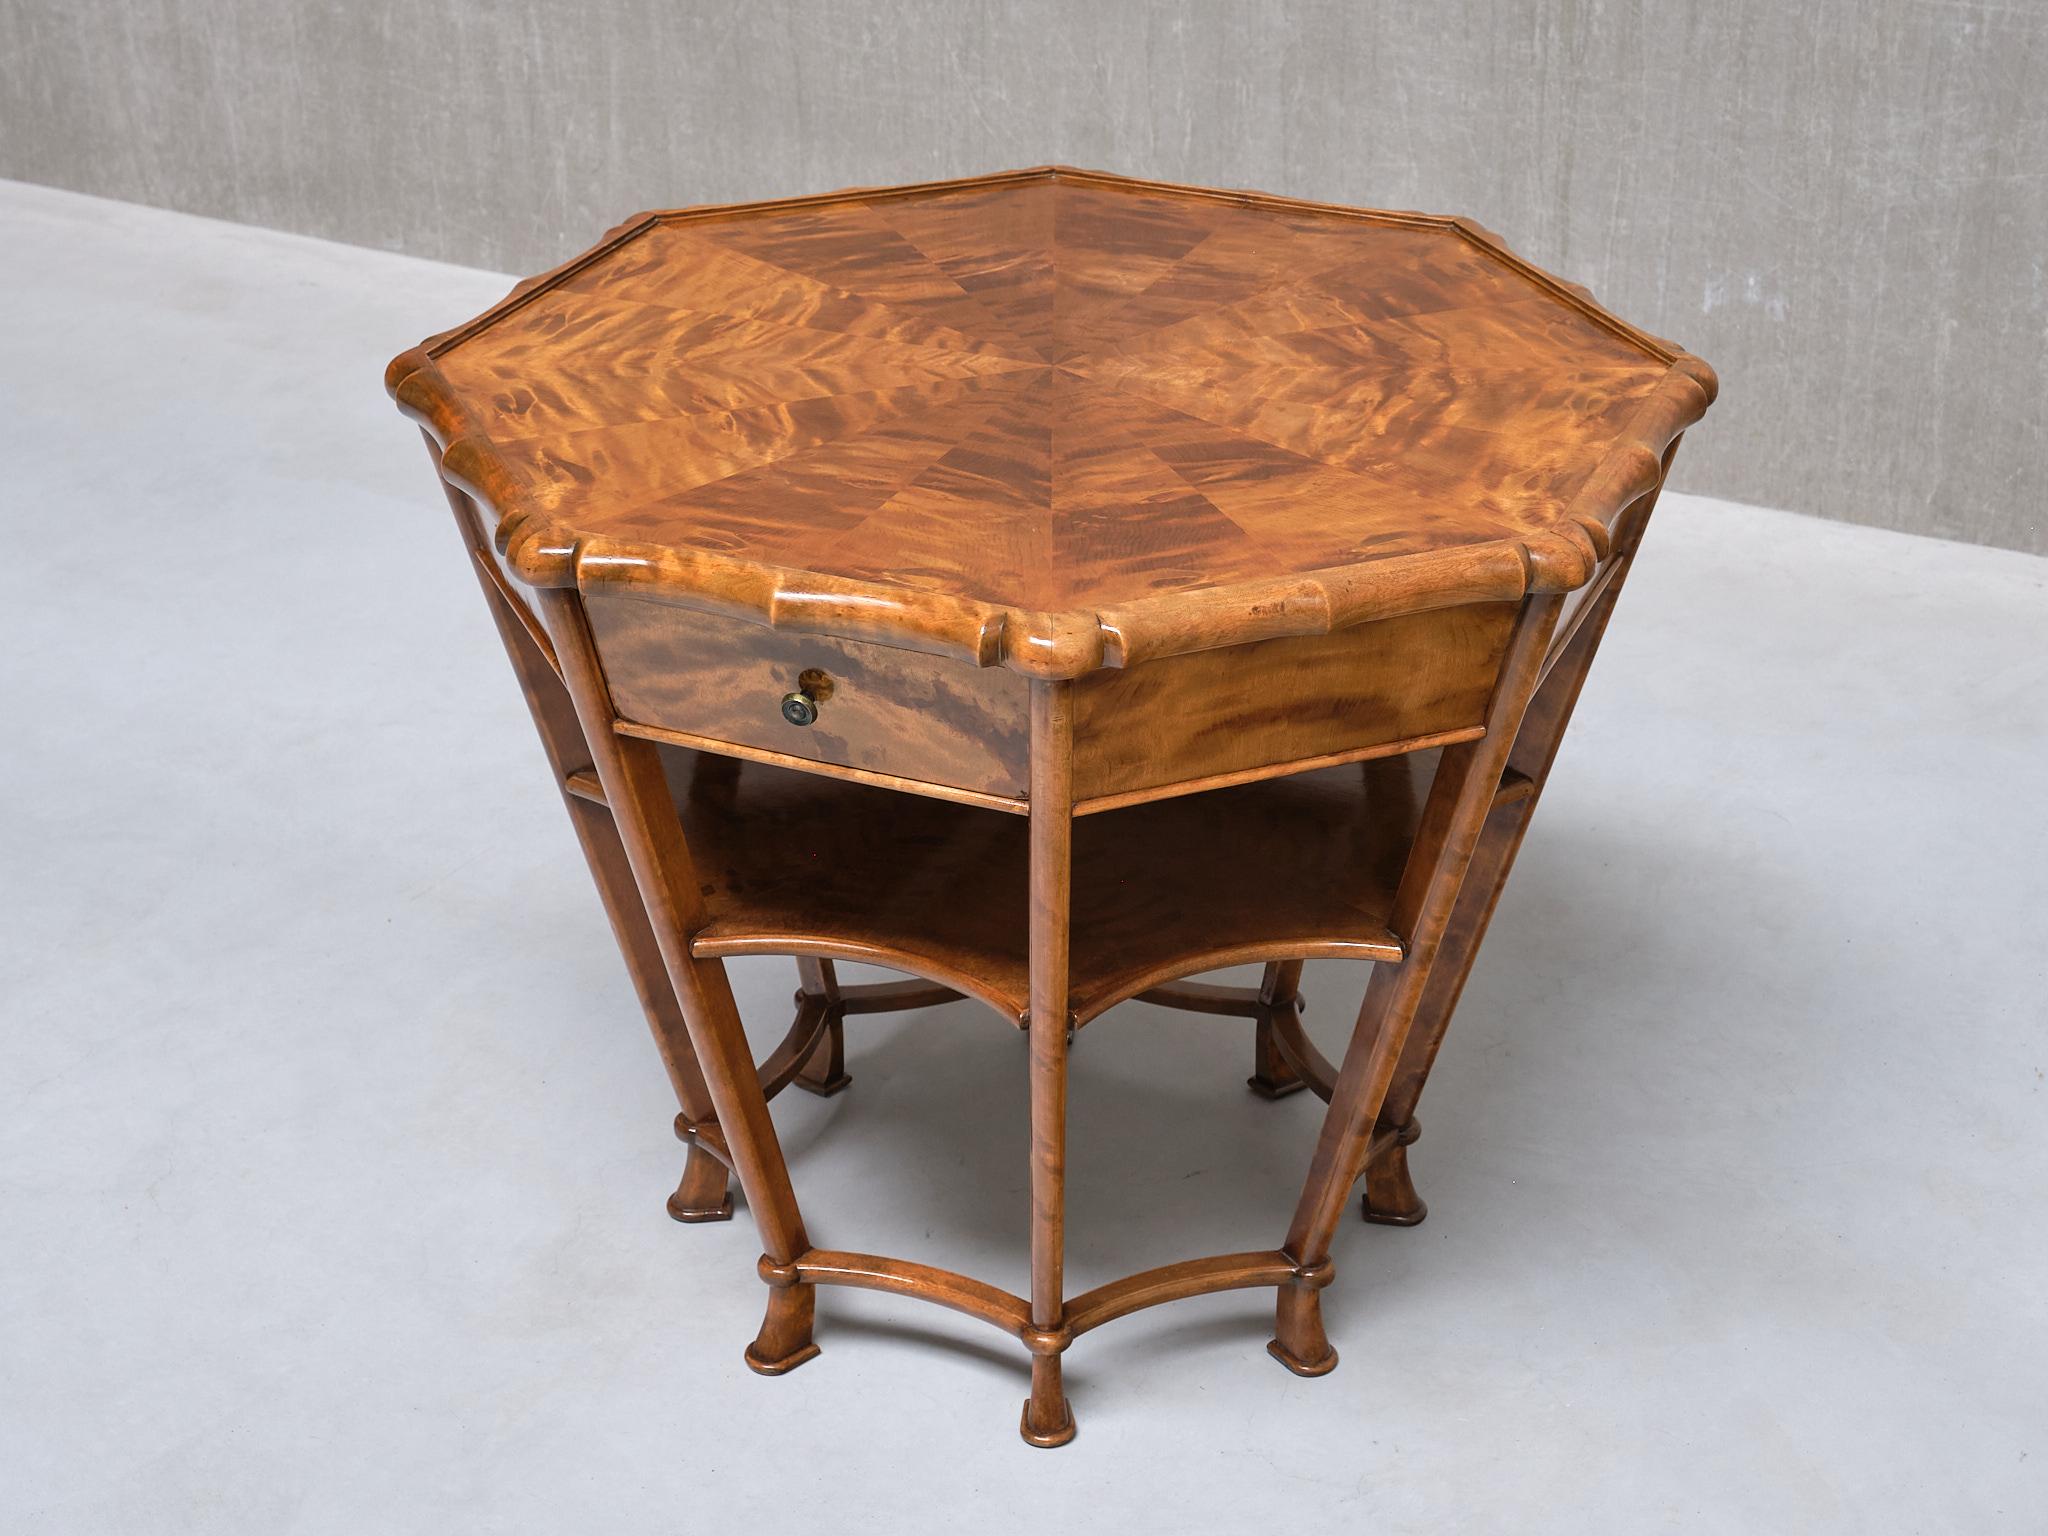 Wood Exceptional Expressionist Octagonal Center Table in Flamed Birch, Germany, 1920s For Sale